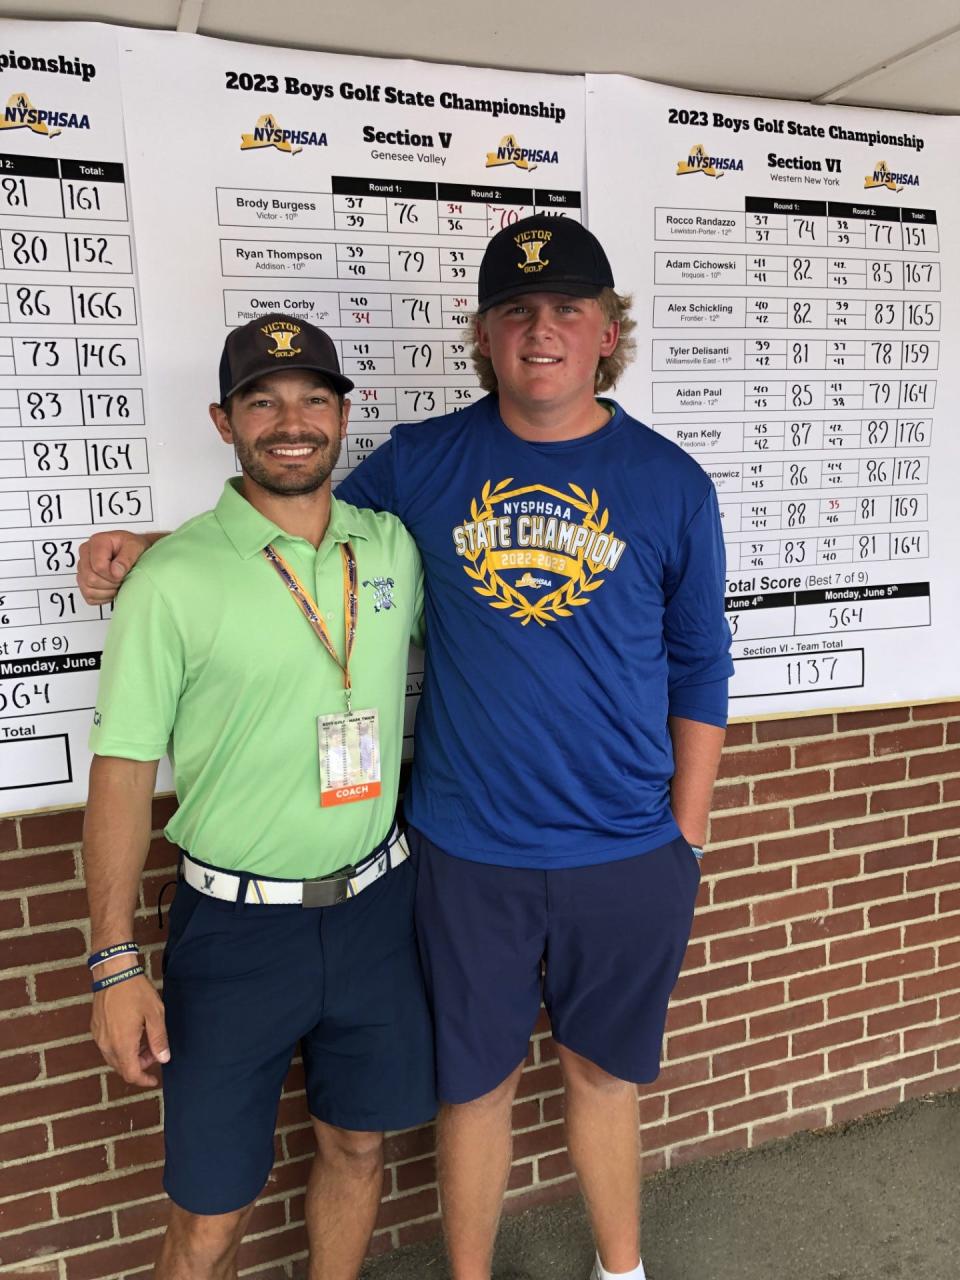 Victor sophomore Brody Burgess (right) with coach Trevor Sousa. Burgess was the NYSPHSAA runner-up after forcing a playoff with eventual champion Dante Bertoni of Union-Endicott.